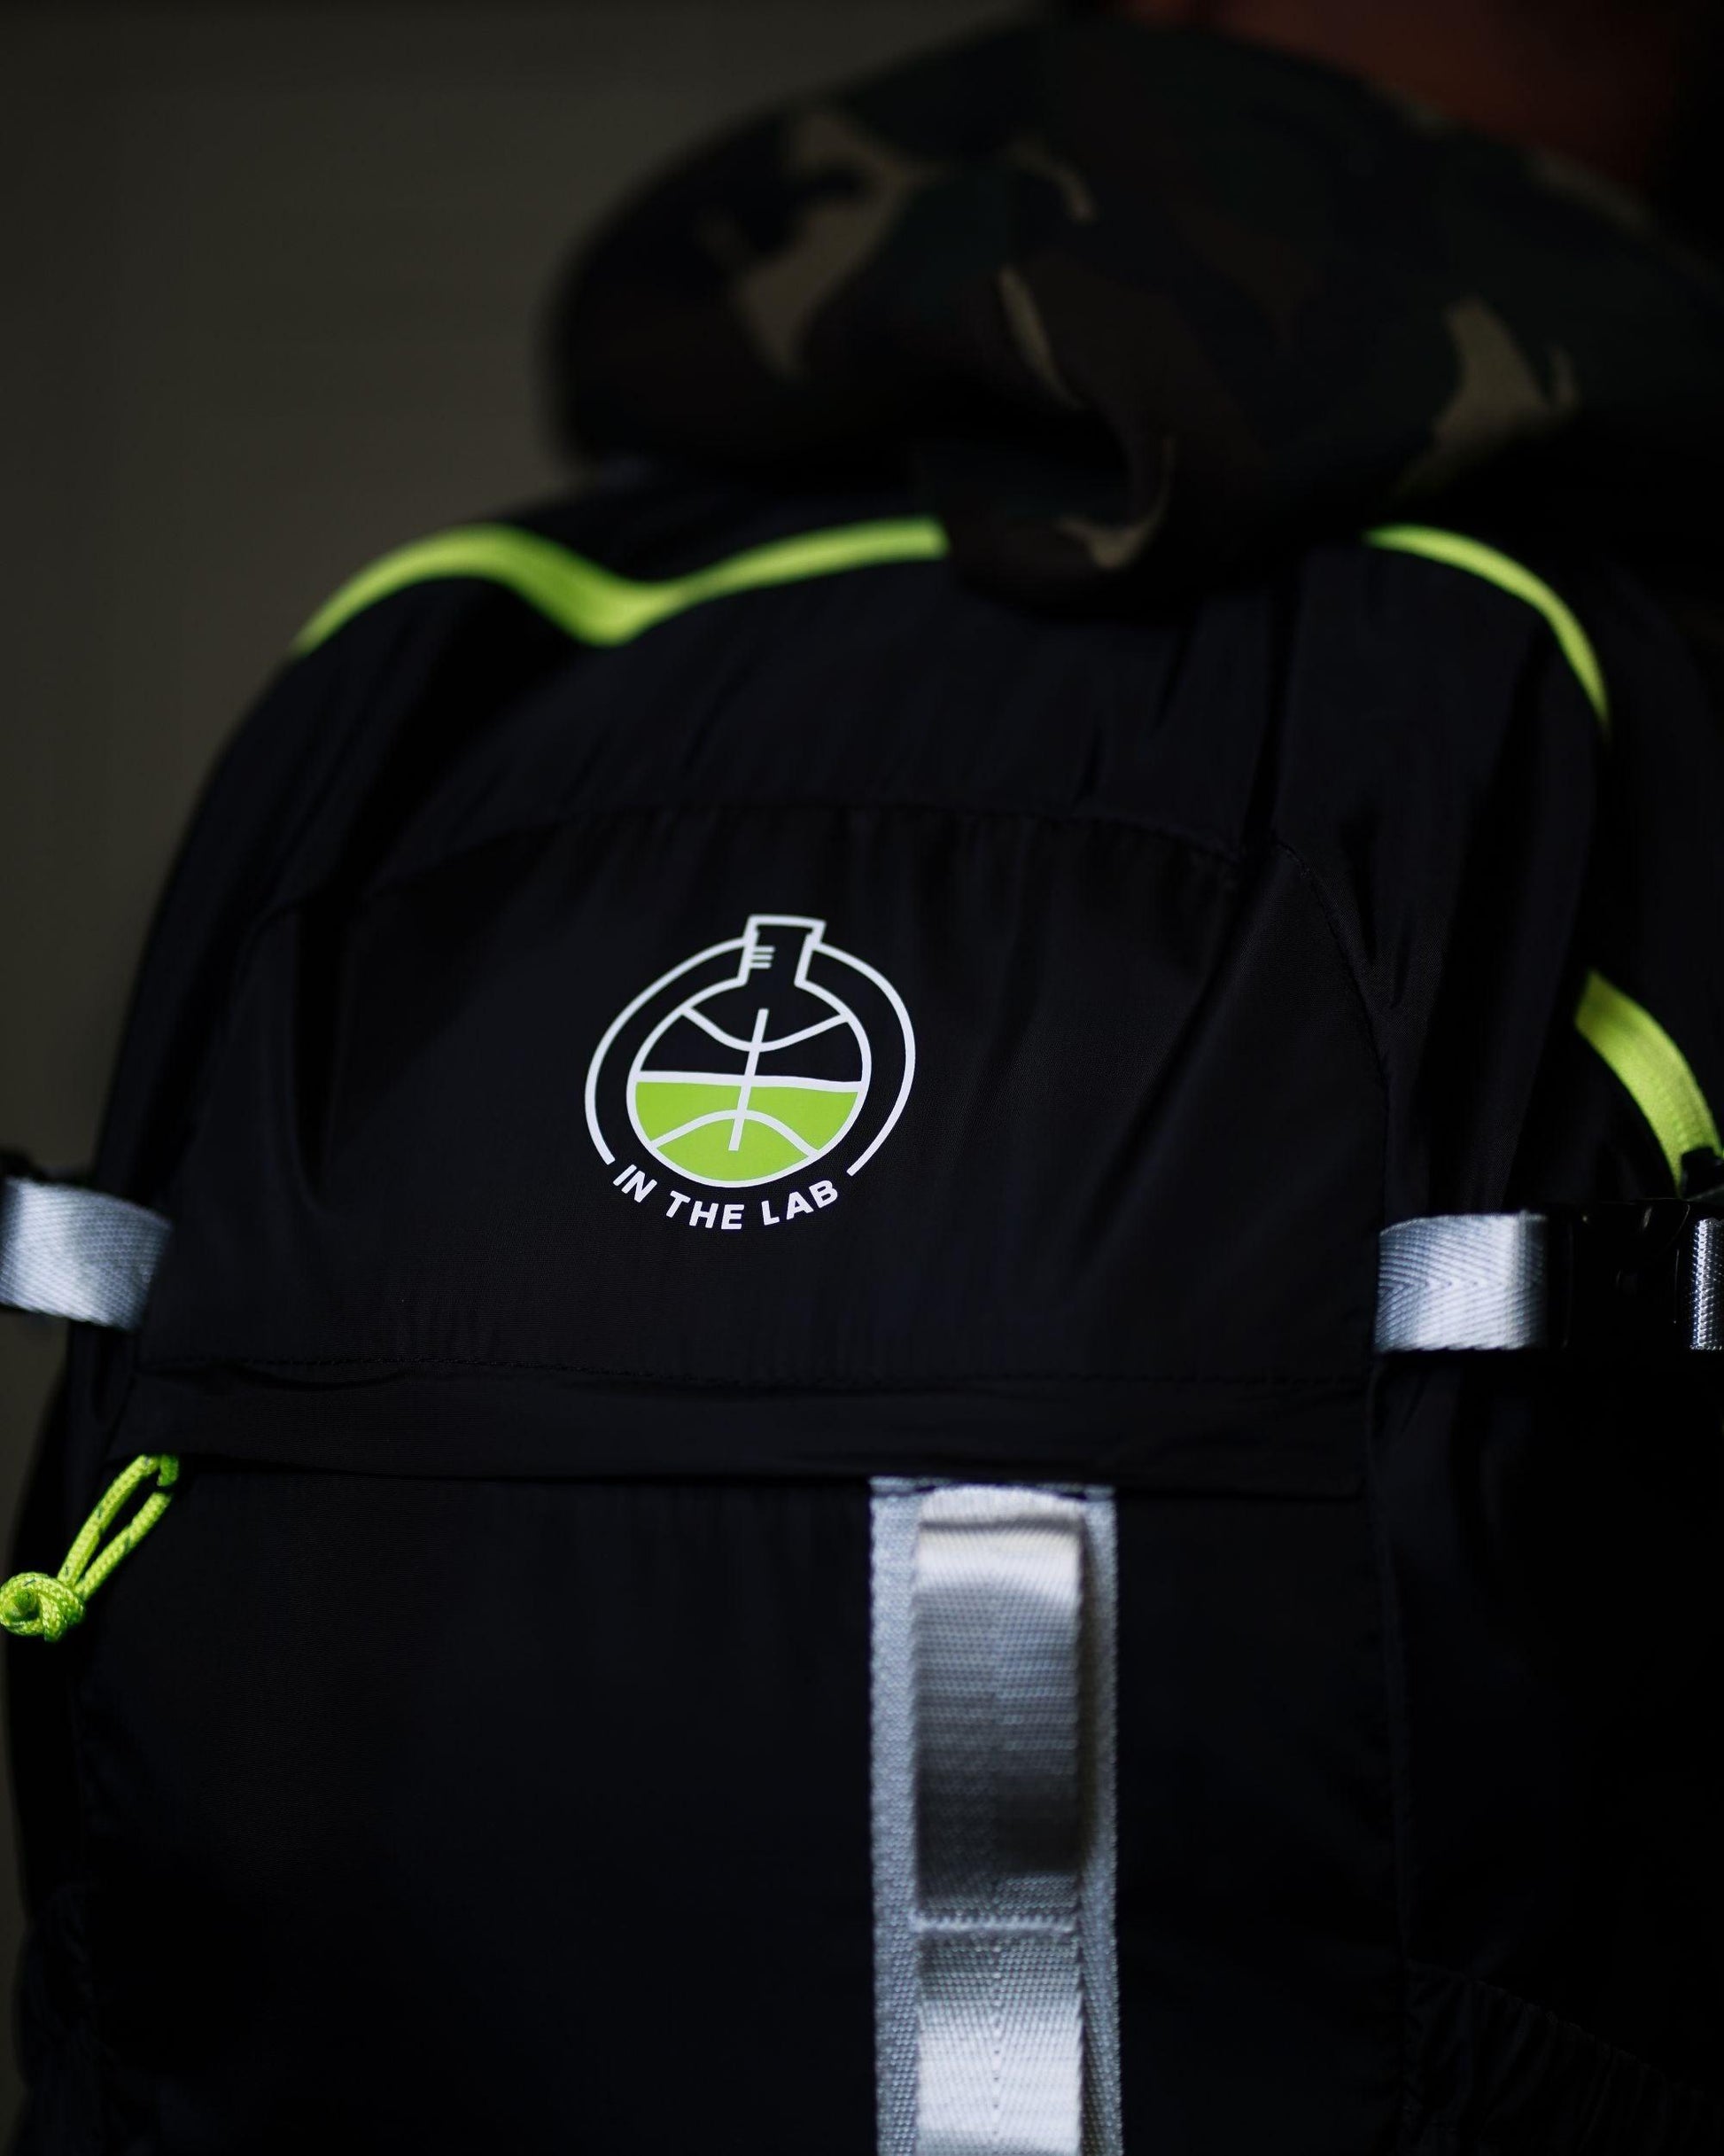 The Classic Backpack - In The Lab